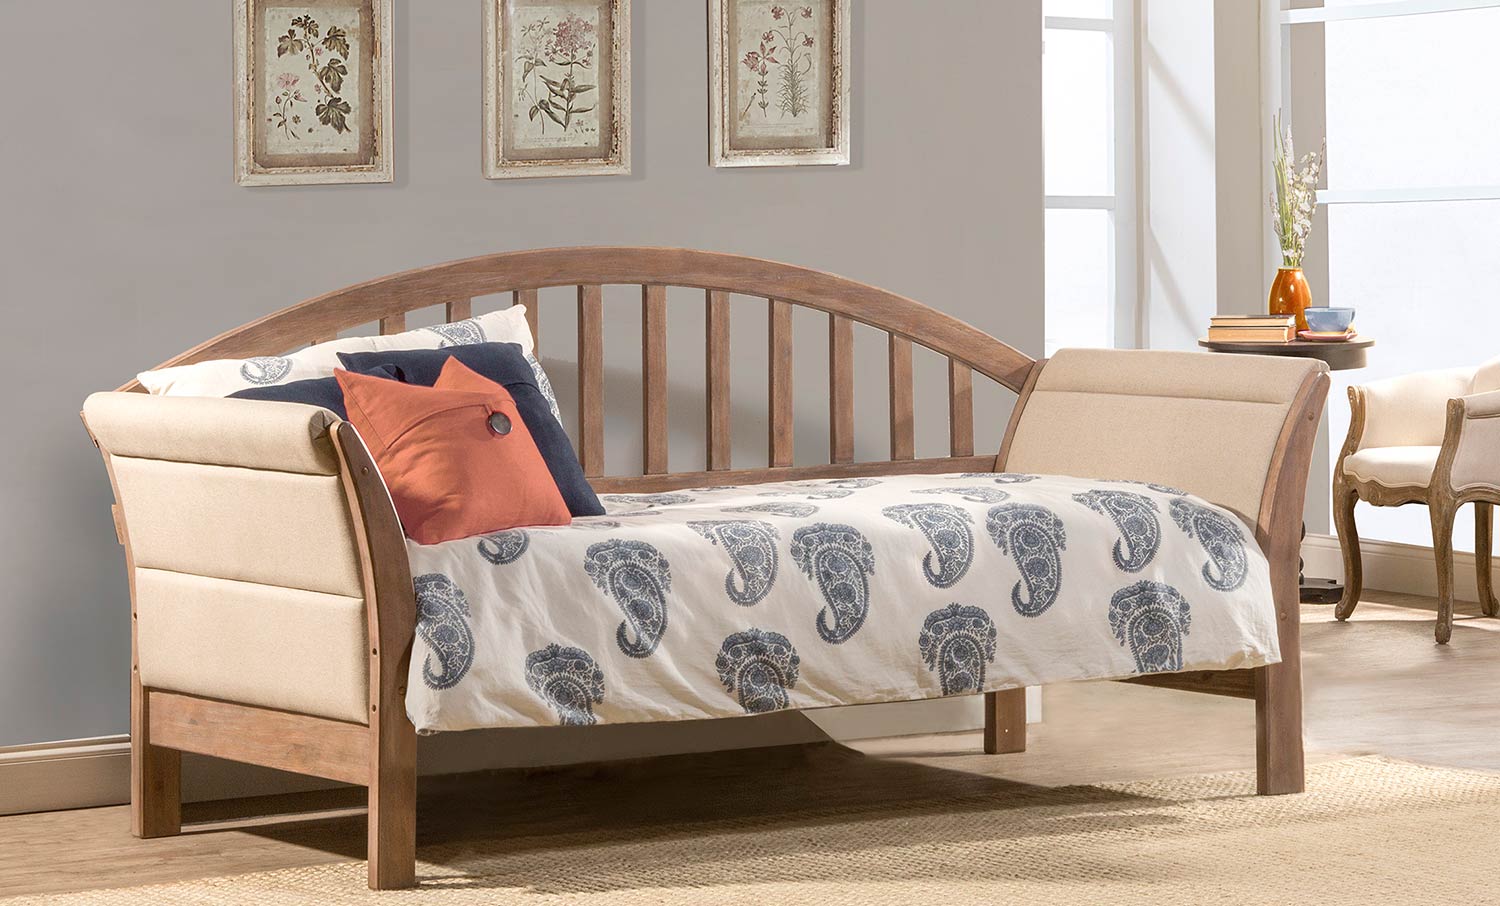 Hillsdale Olenec Daybed with Suspension Deck - Brushed Pine